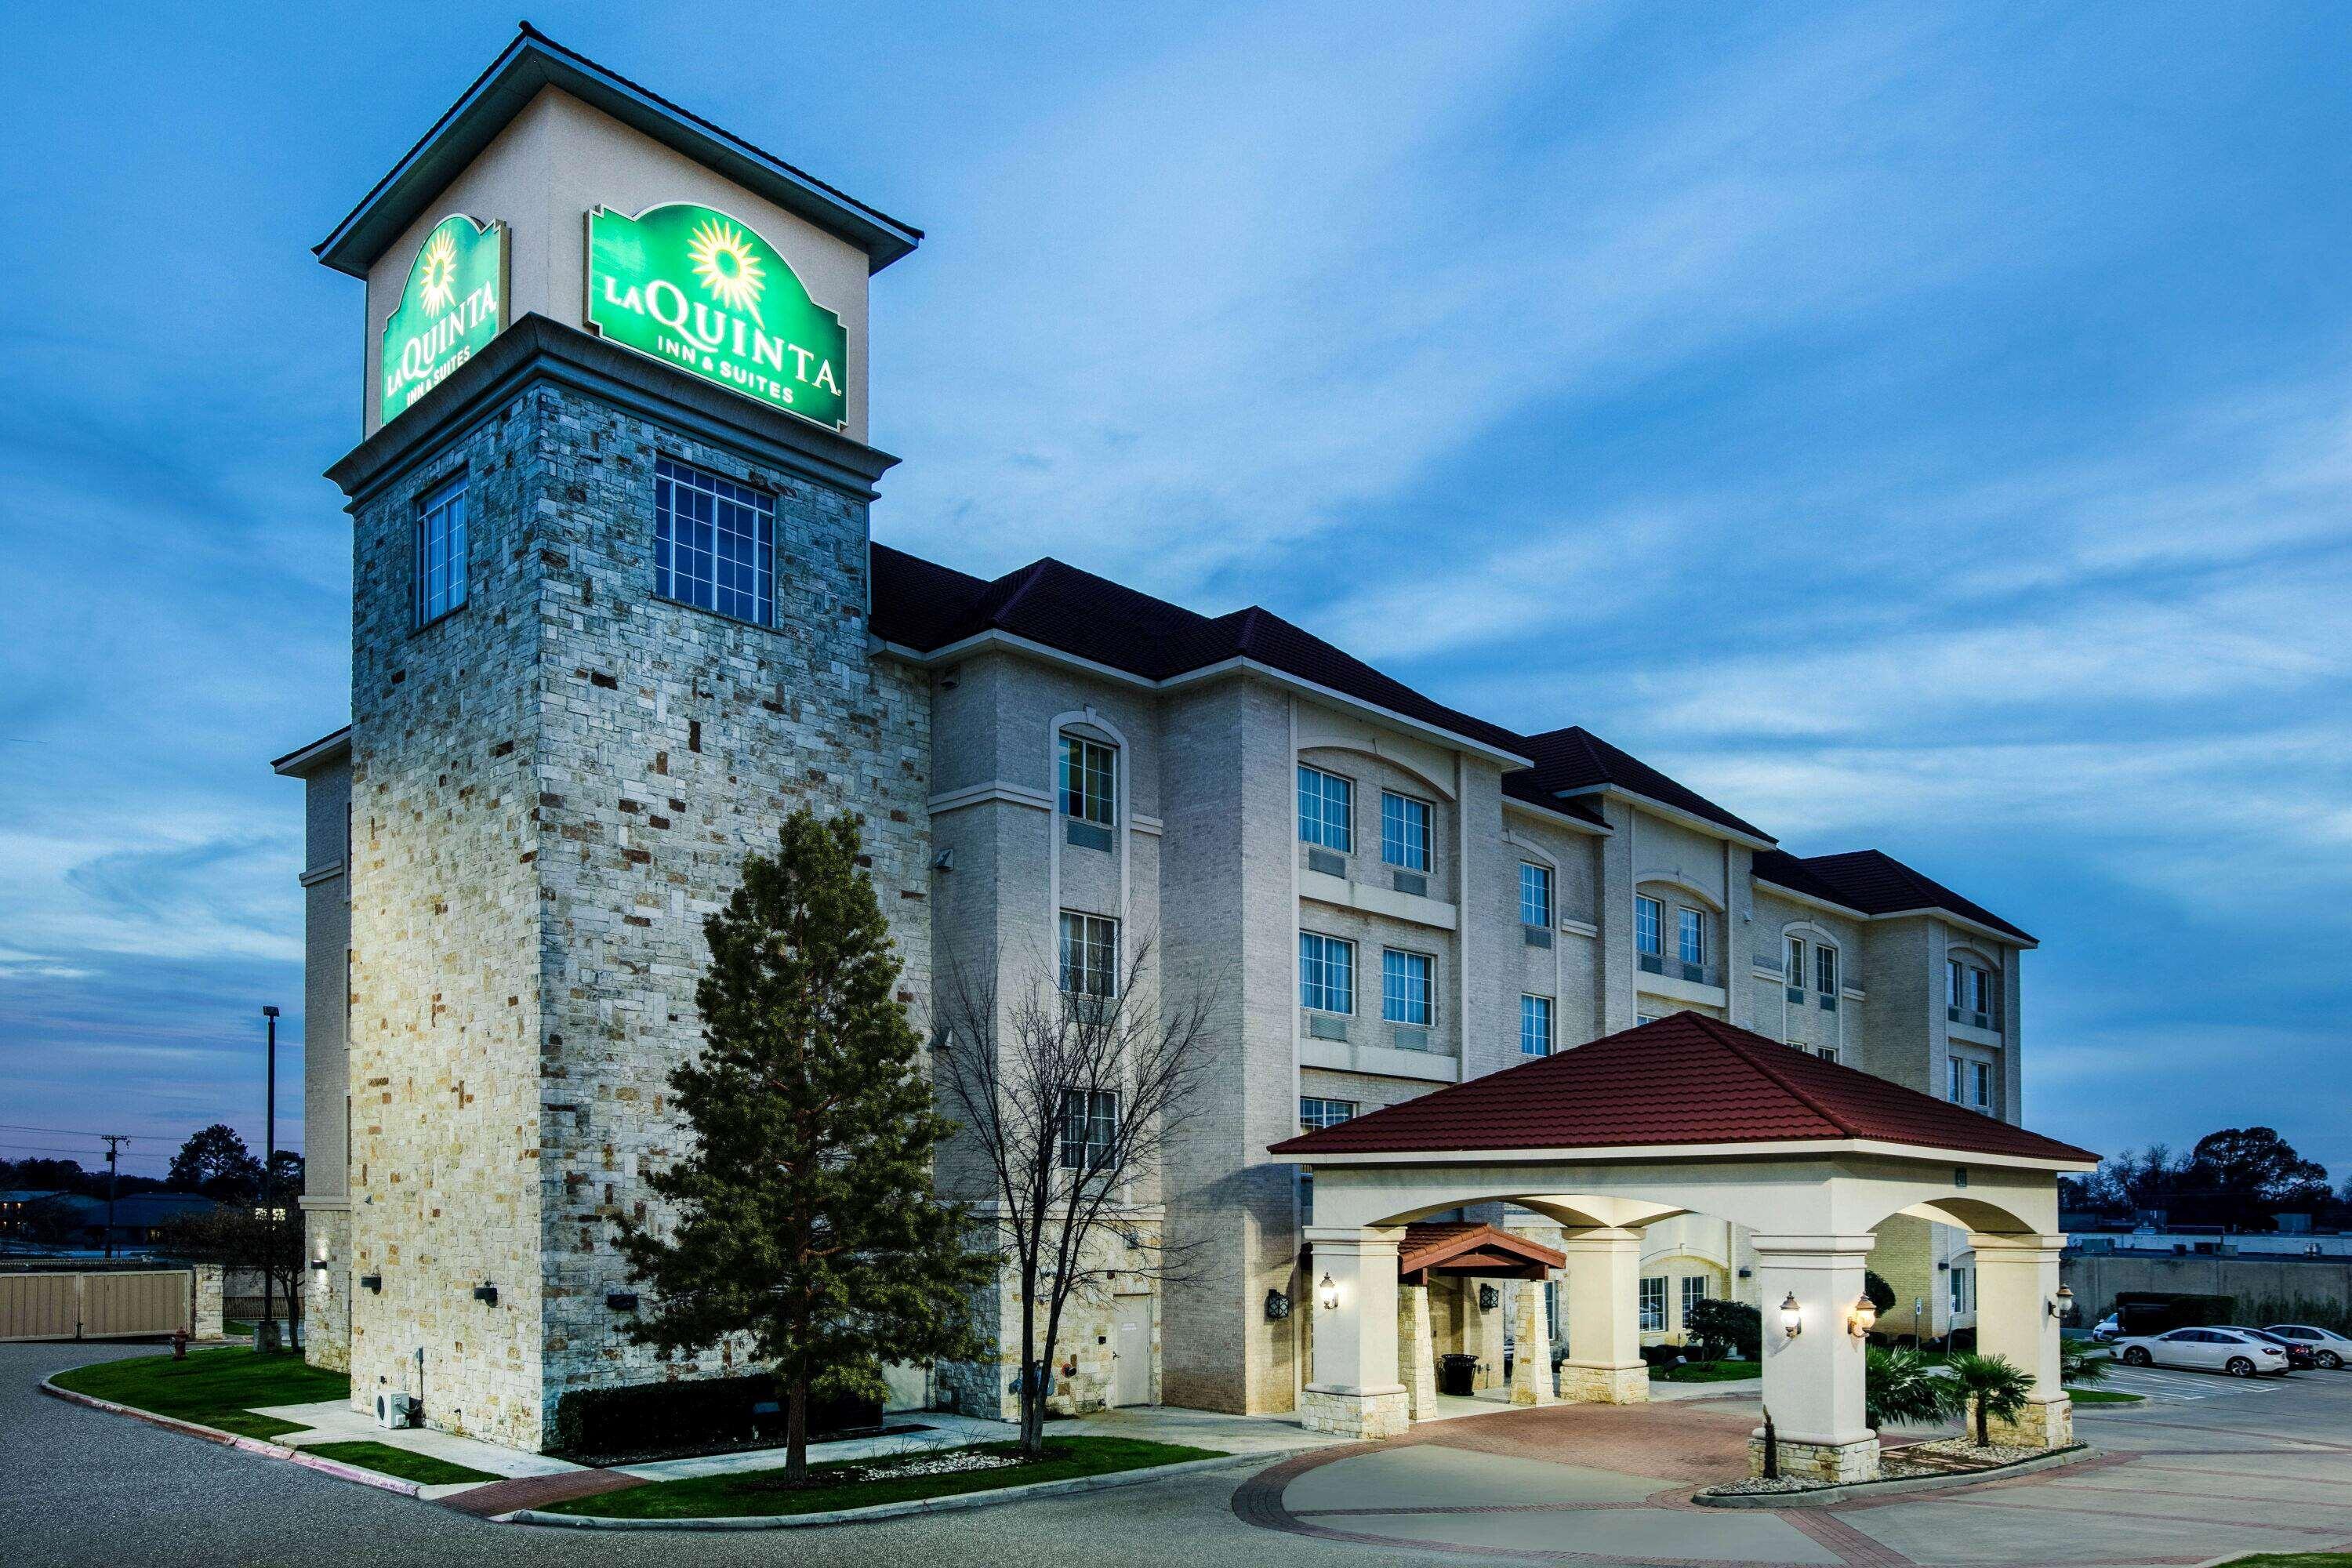 La Quinta By Wyndham Dfw Airport West - Euless Hotel Exterior photo